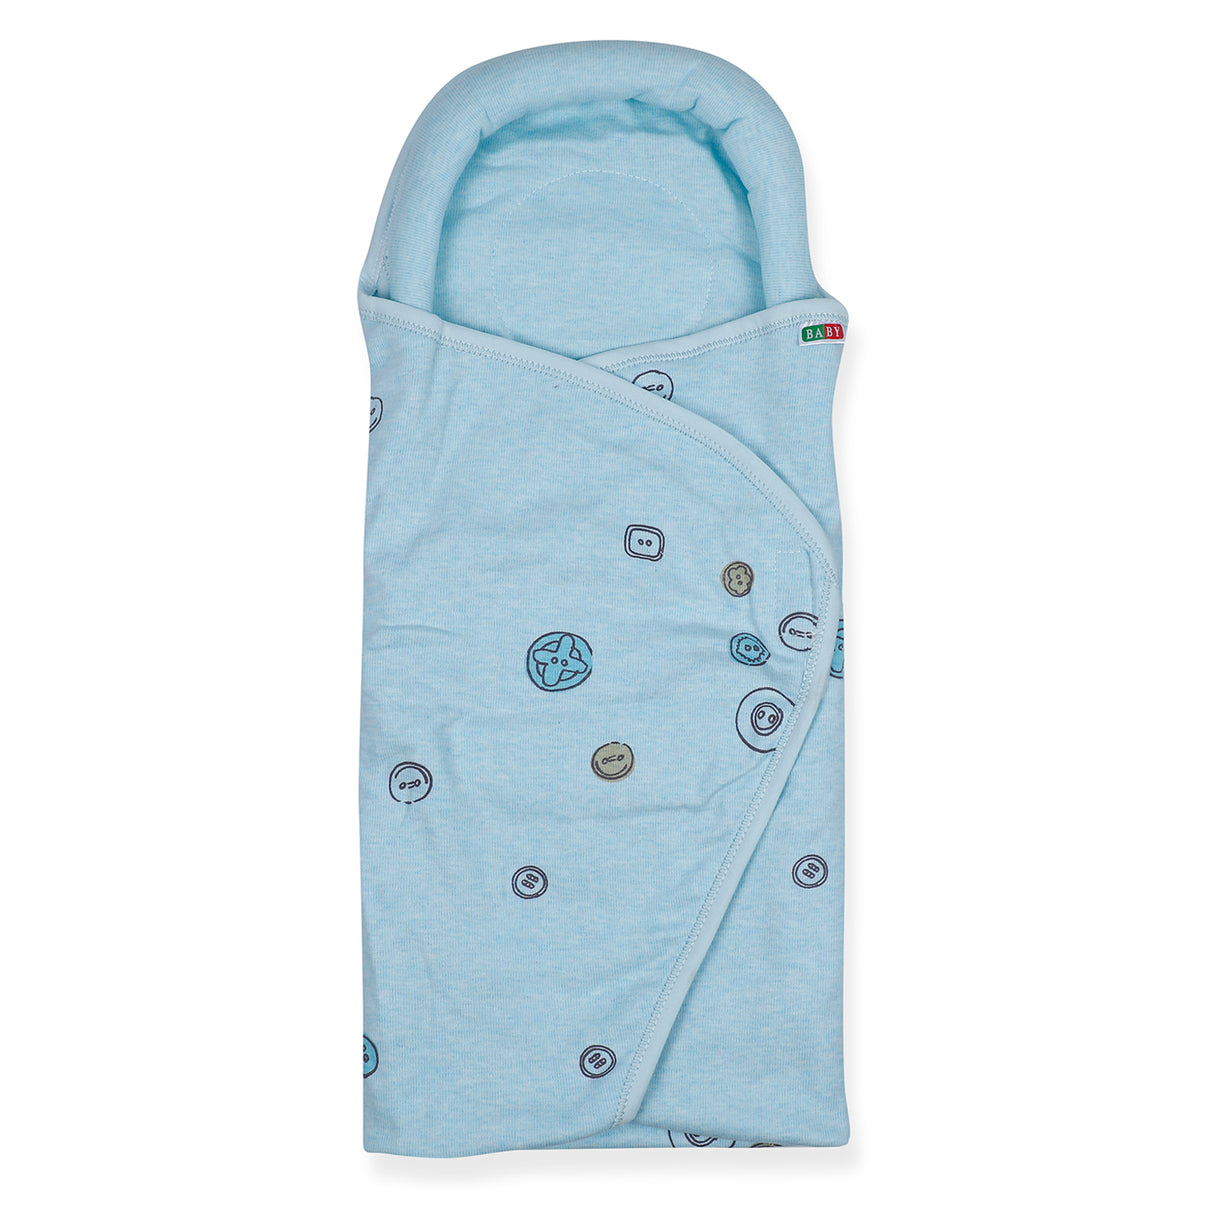 Soft And Cozy Snuggy Ready Swaddle